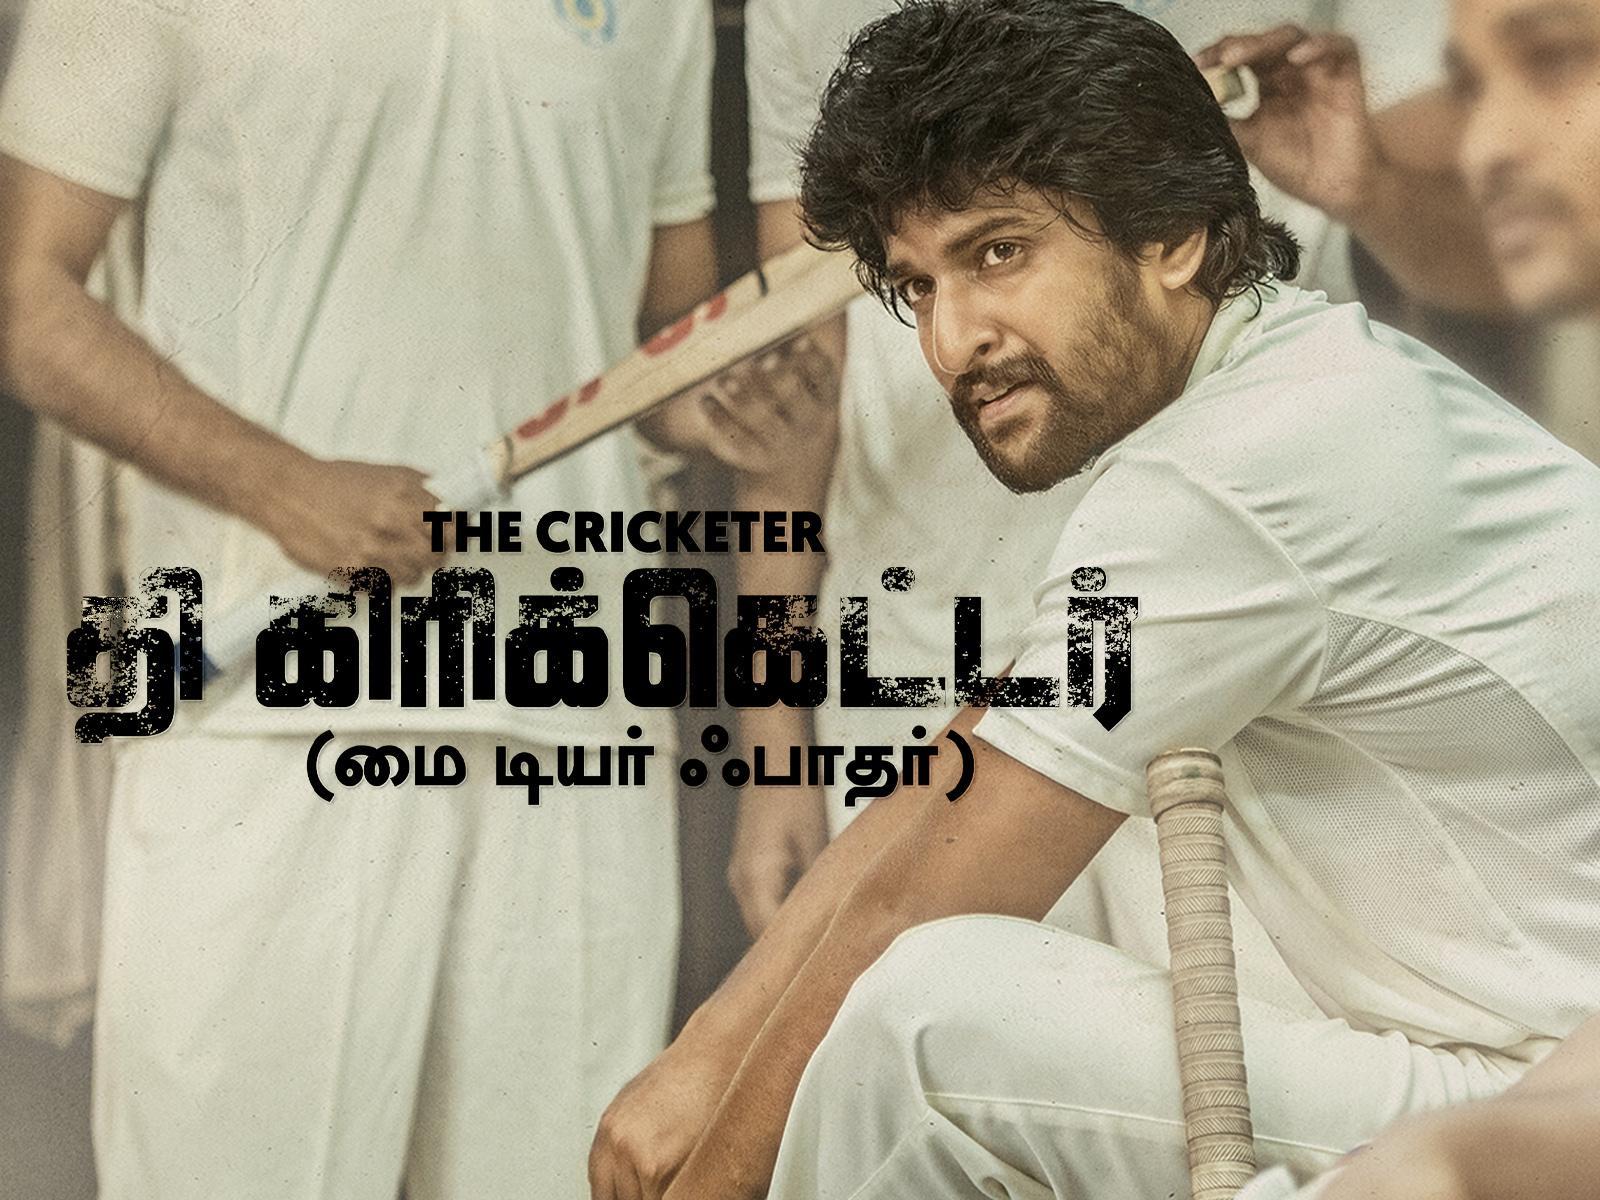 Jersey Full Movie Tamil Dubbed Download, The Cricketer My Dear Father, Nani